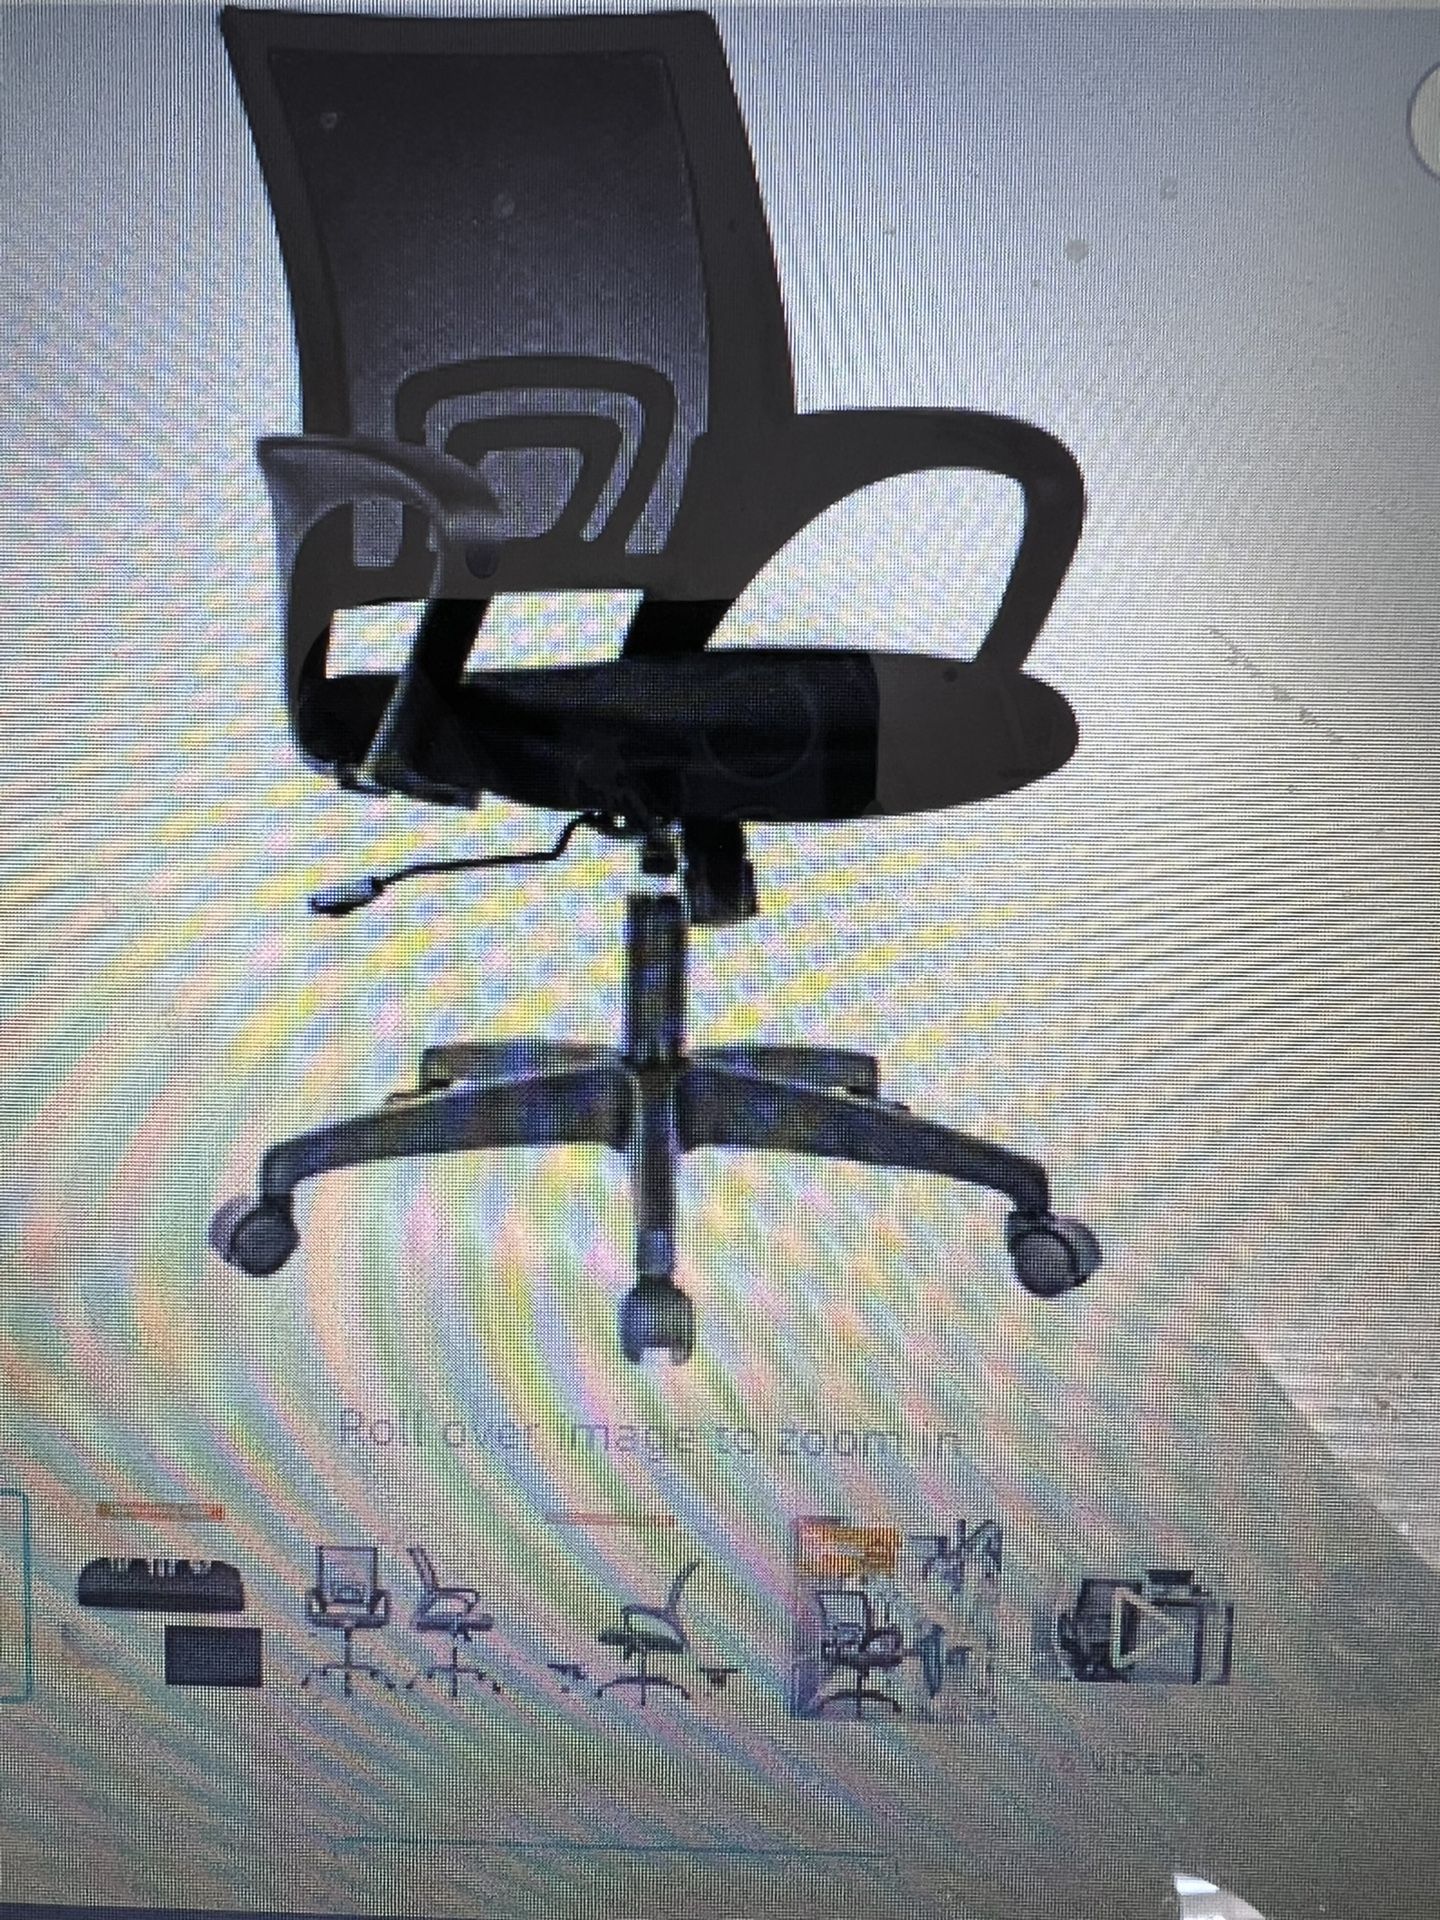 Home office Chair - Black